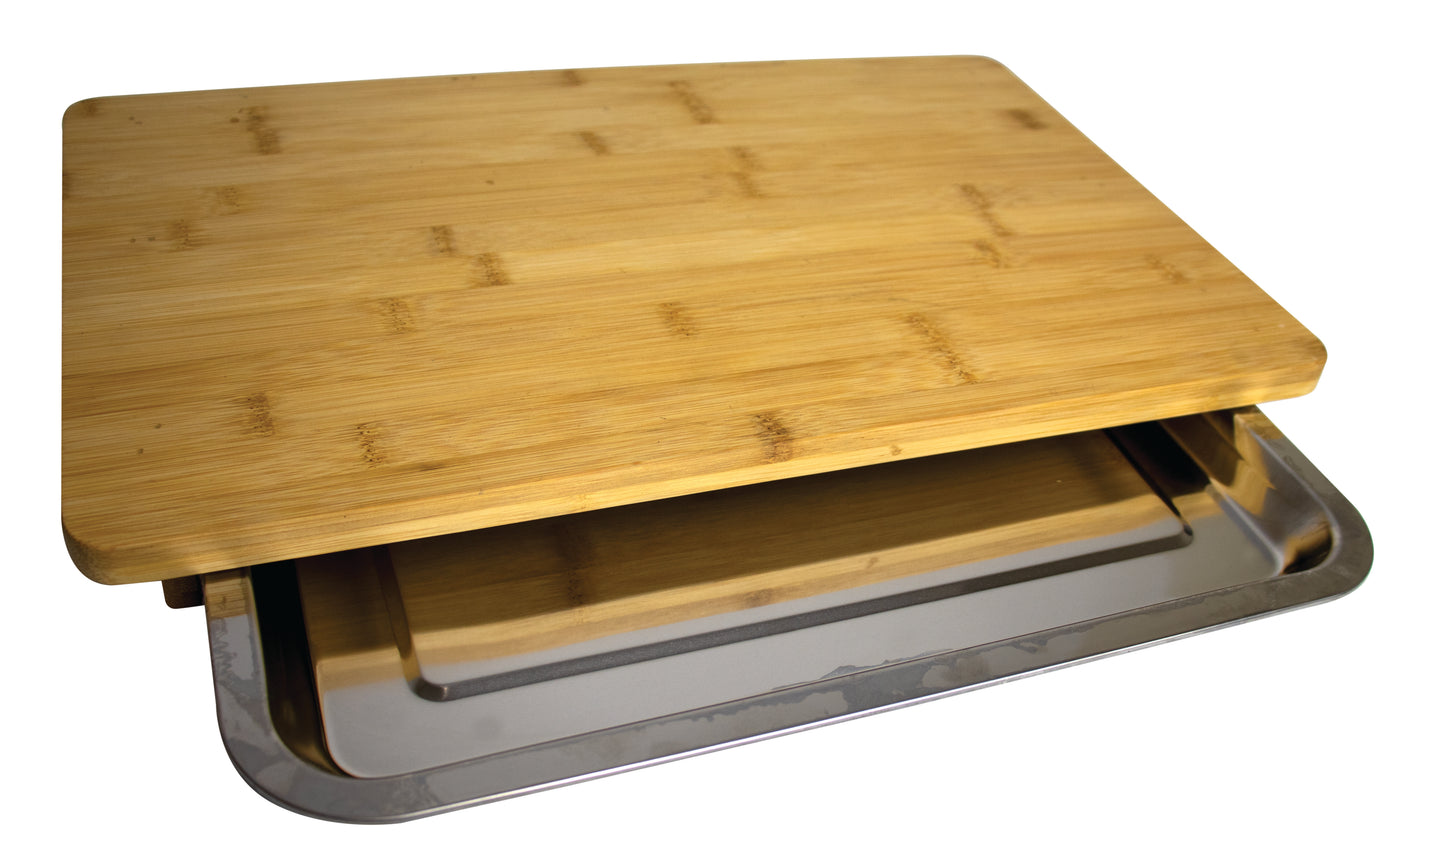 Carton of 6 x Bamboo Chopping Boards with Trays @ R150 each